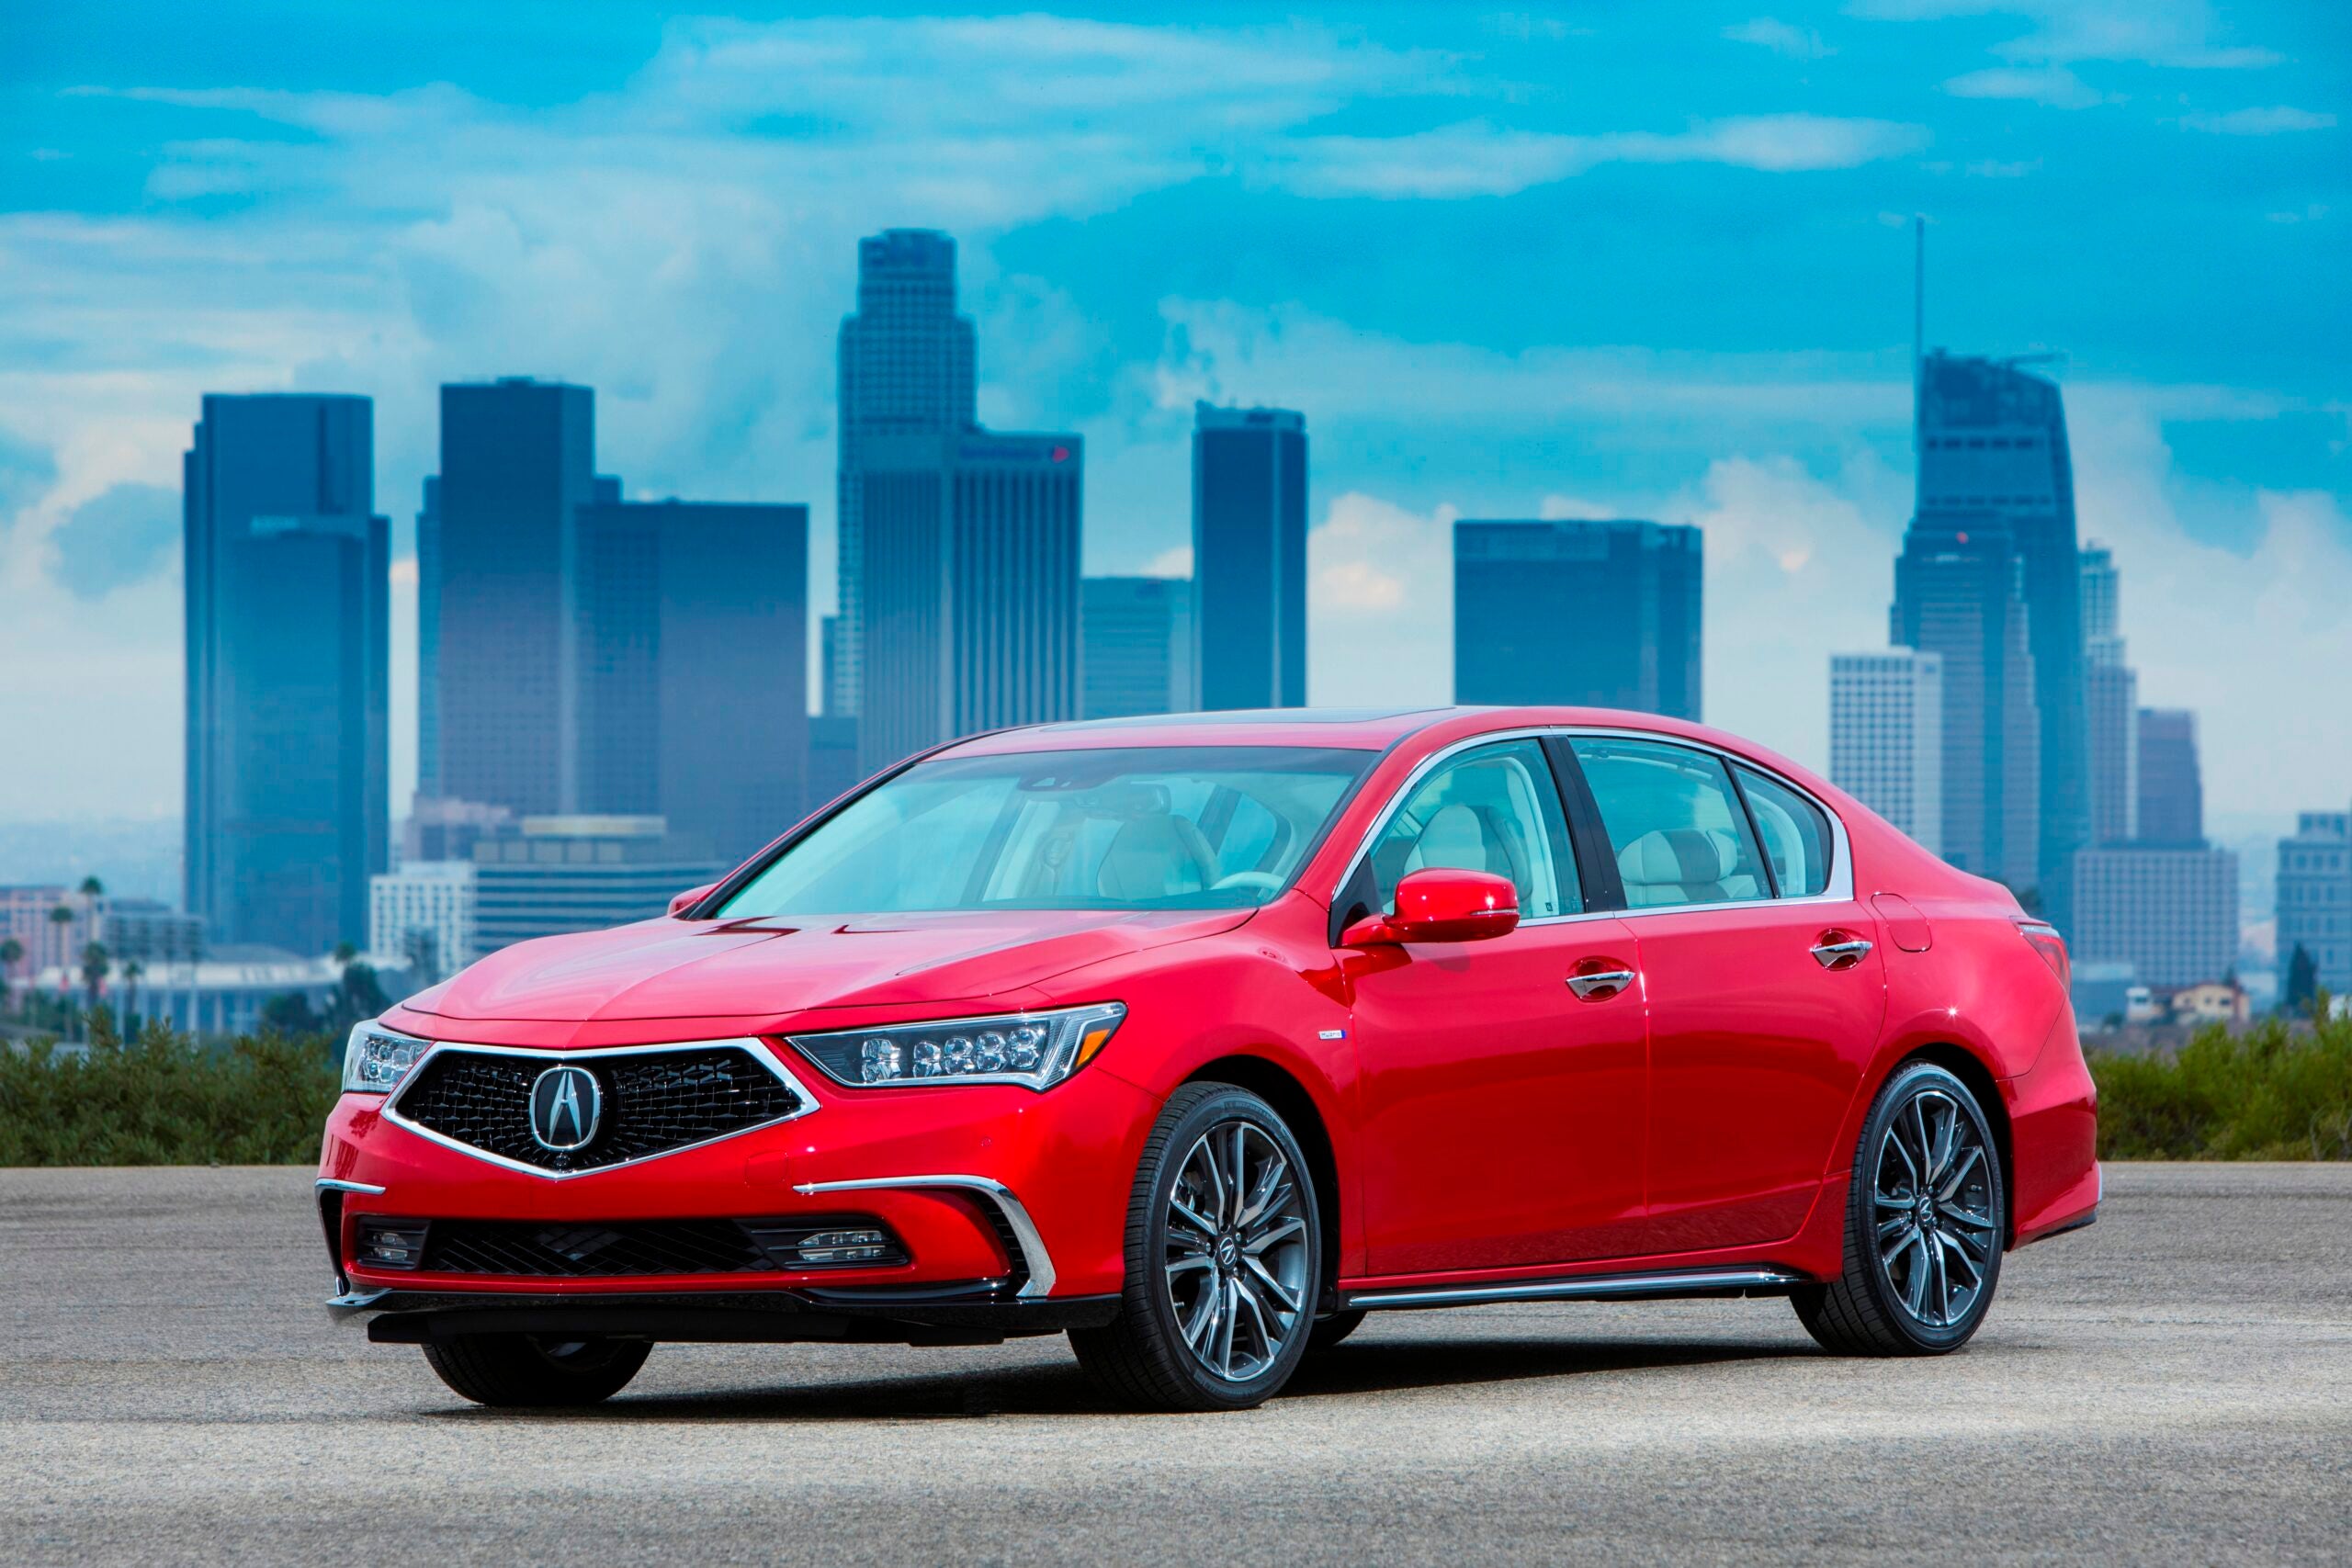 What The Experts Say About The 18 Acura Rlx